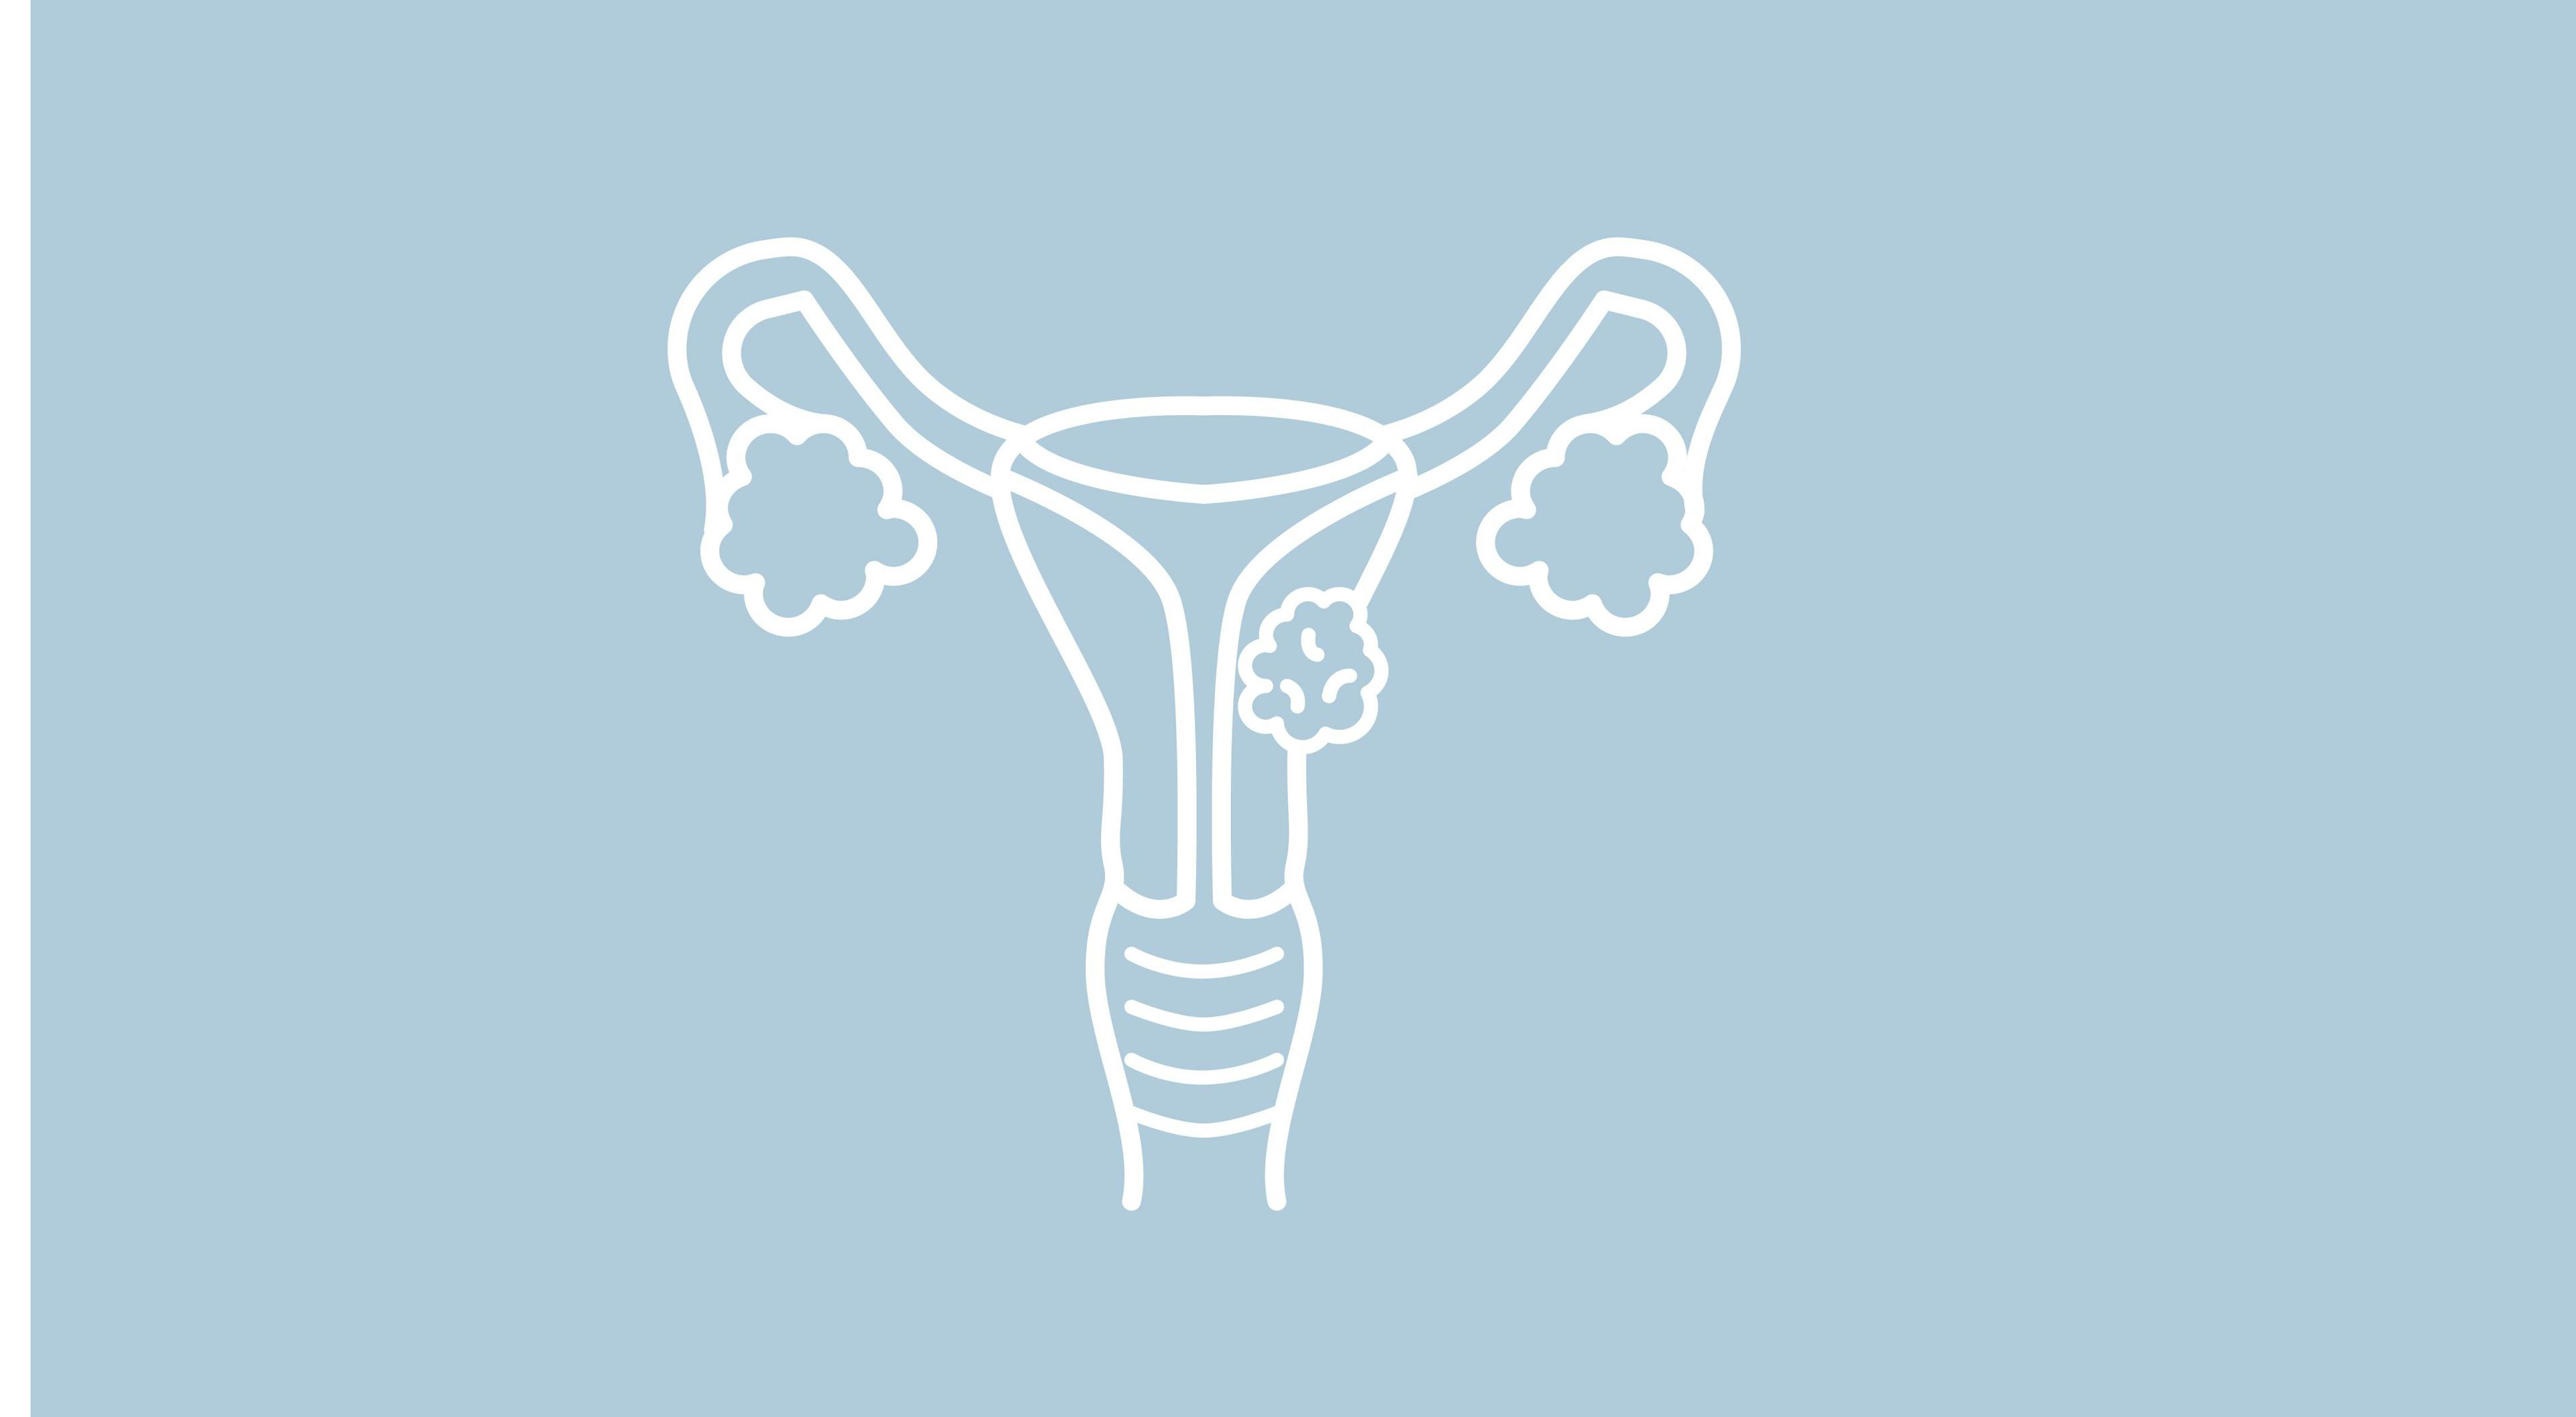 Early Surgery in Endometrial Cancer Linked to Worse Survival Outcomes